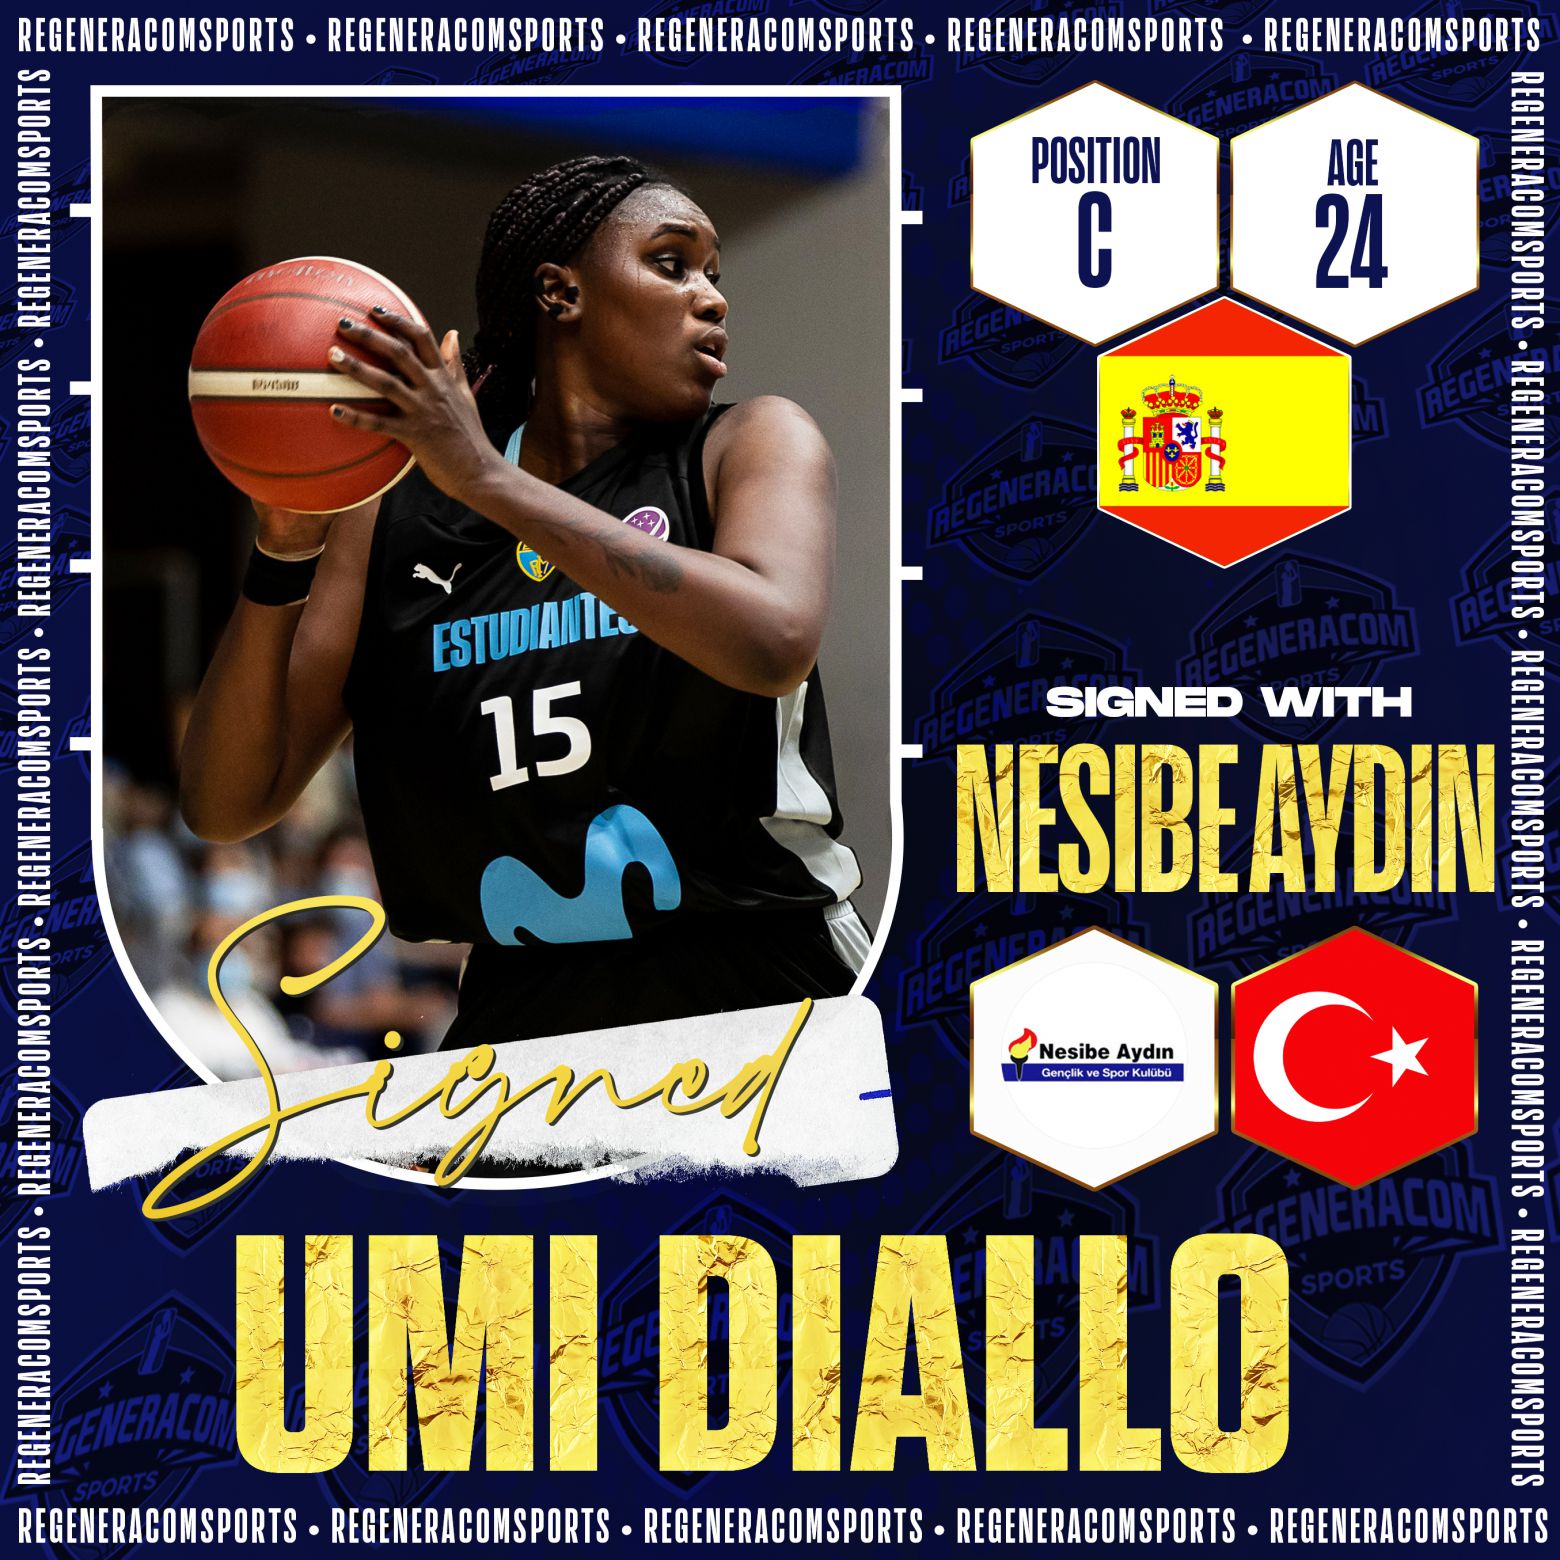 UMI DIALLO has signed in Turkey with Nesibe Aydin for the 2022/23 season